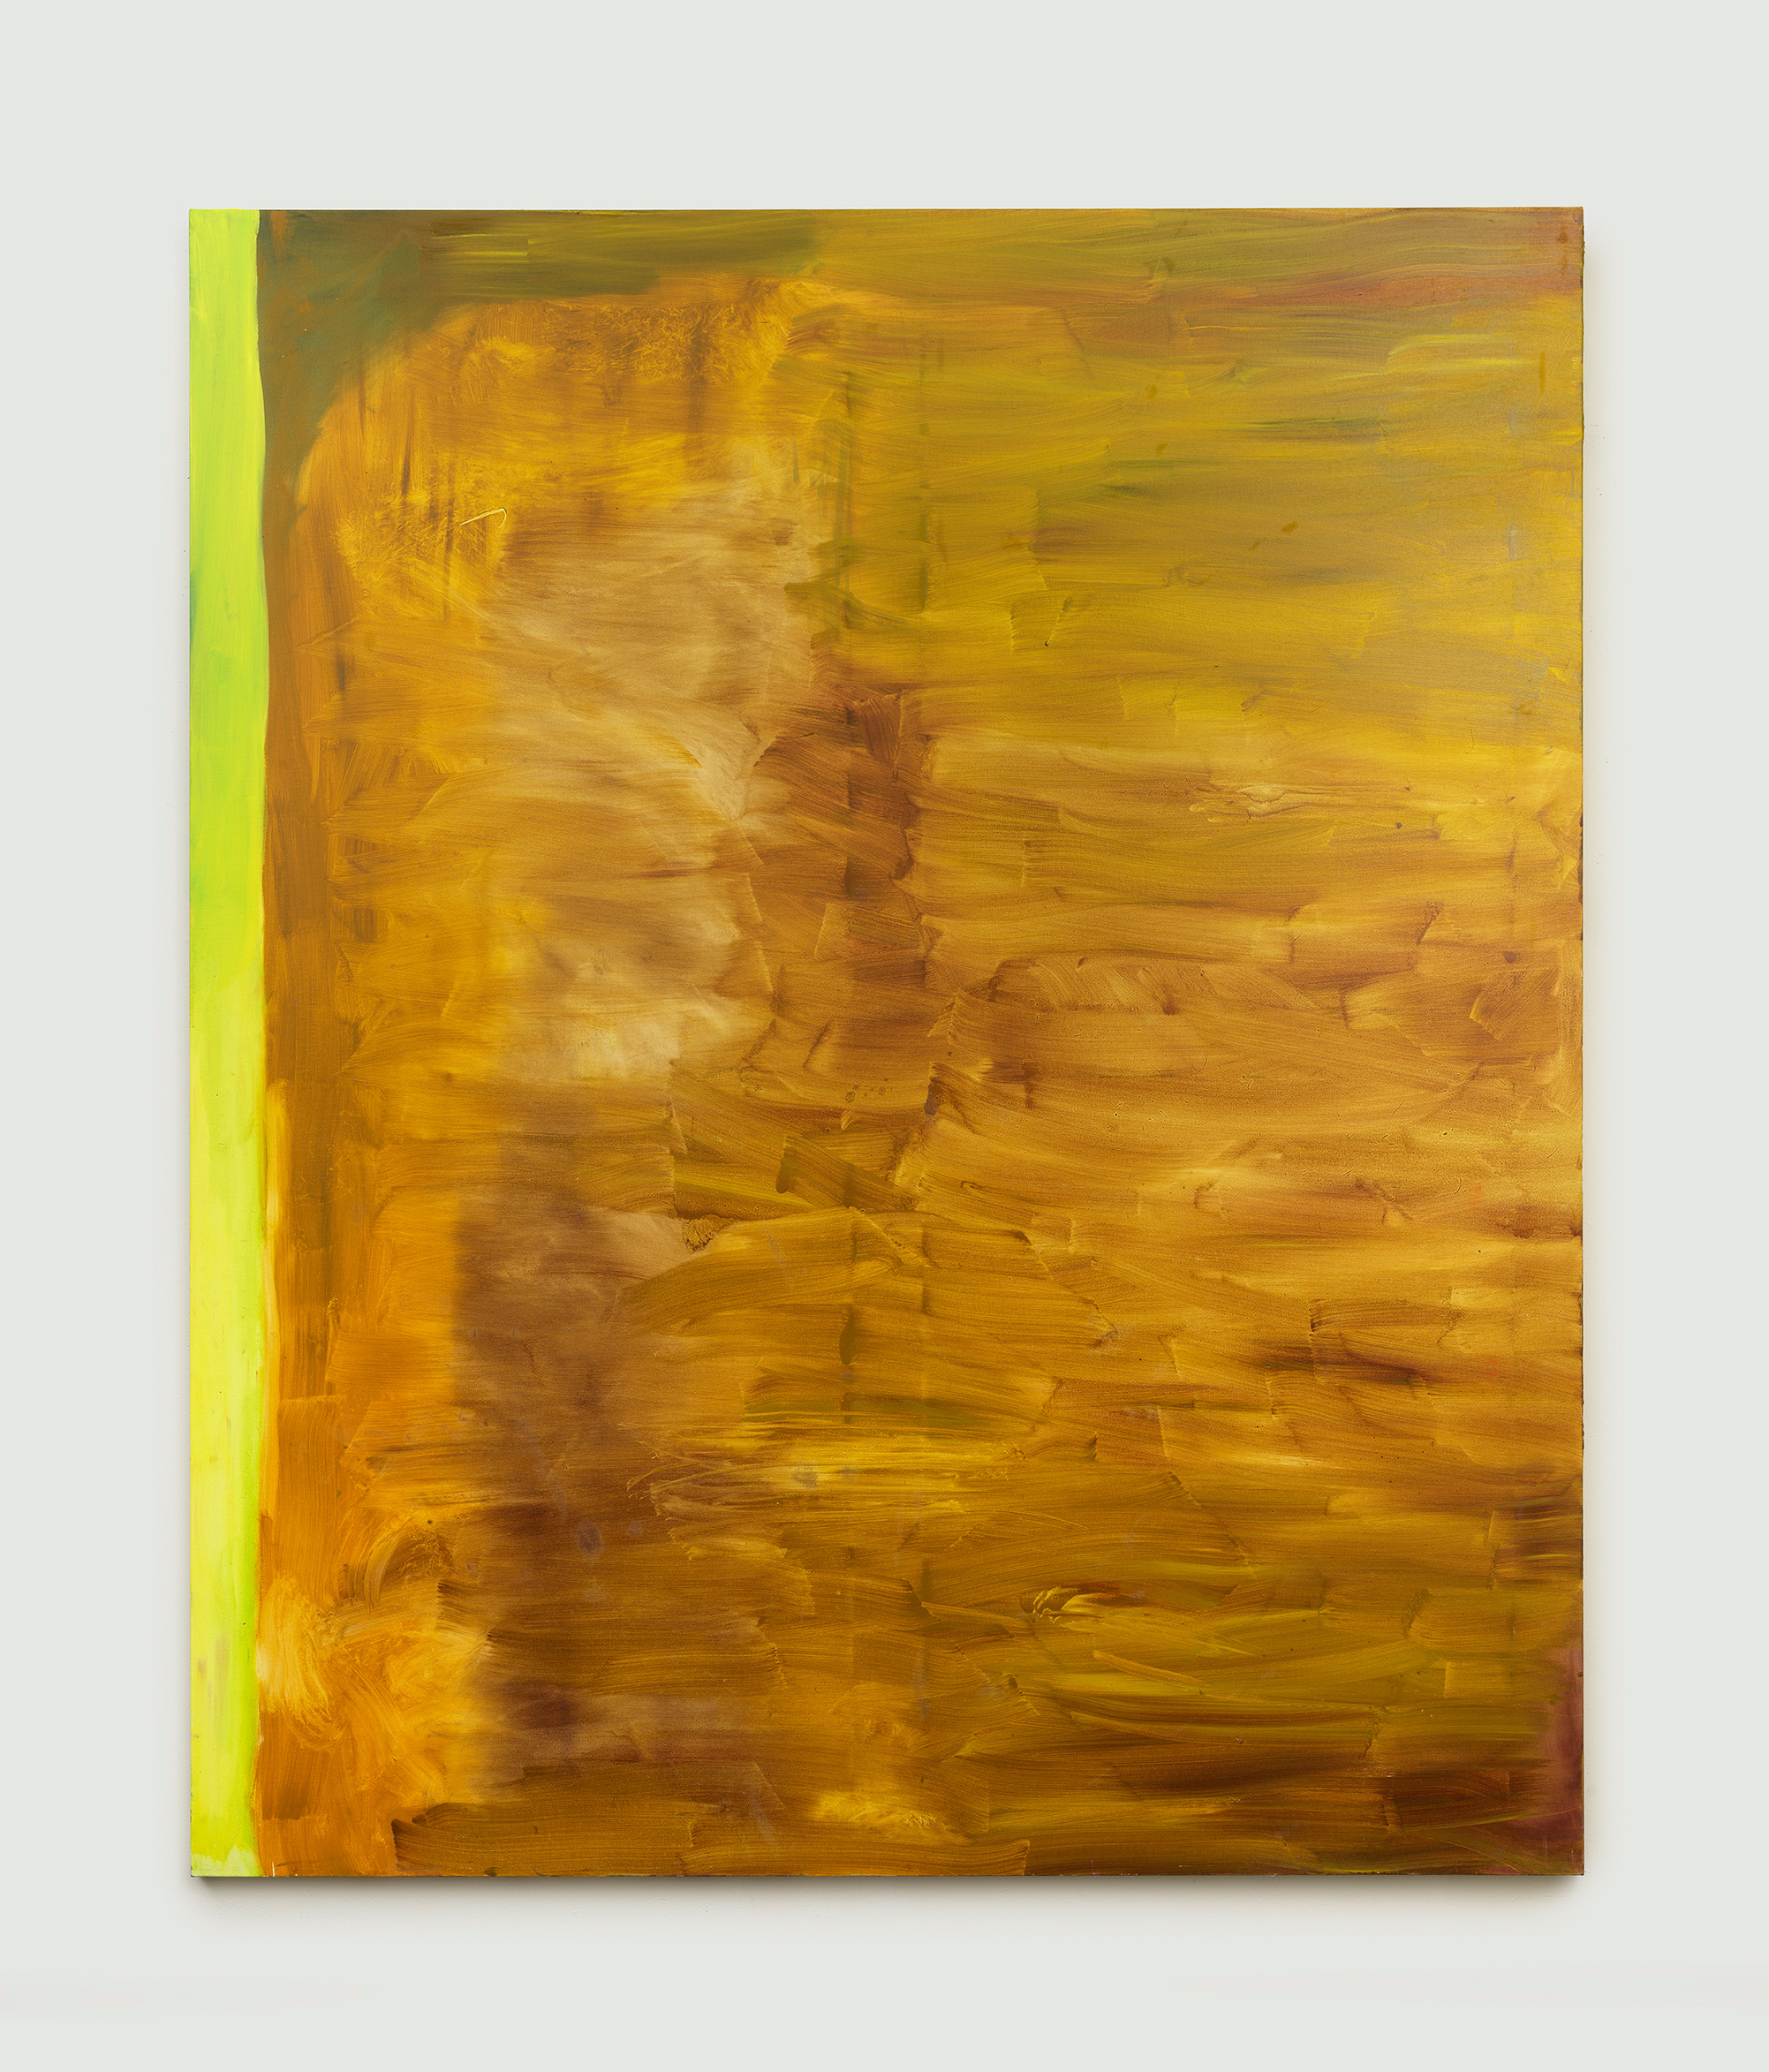 Jane Swavely, Corrected Painting #4, 2022, 73 x 61 in.